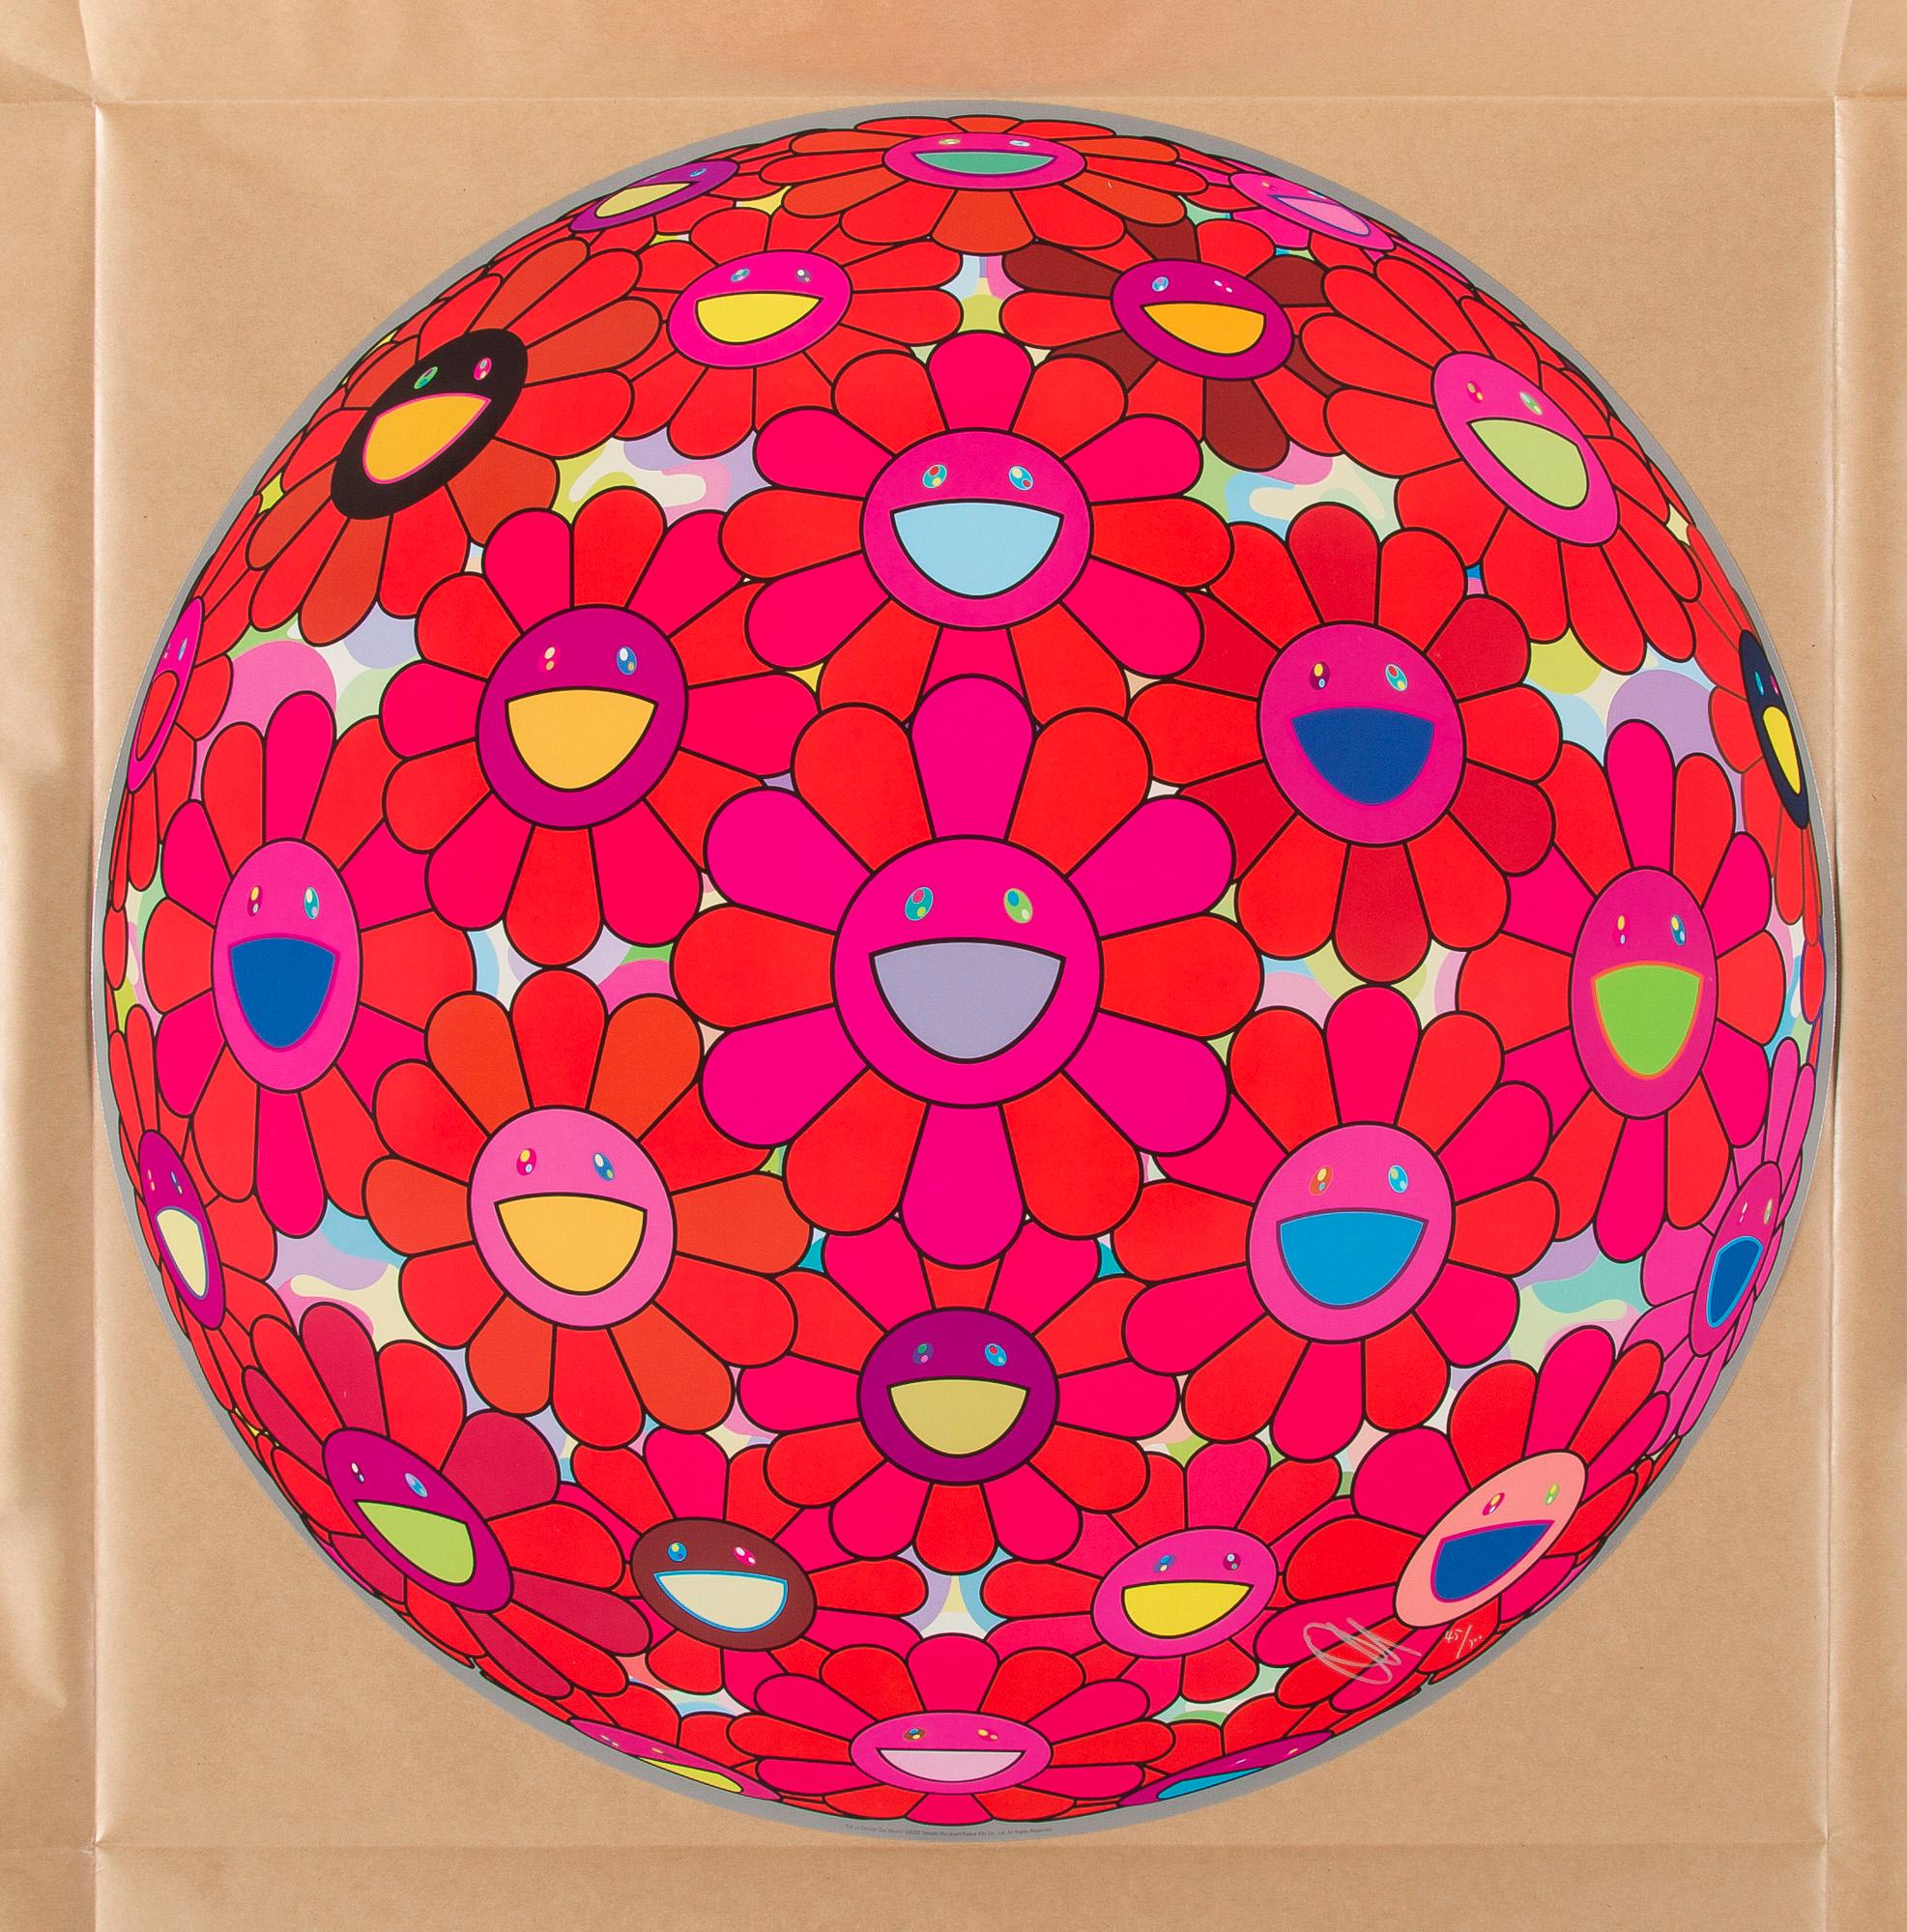  Let us Devote Our Hearts Limited Edition (print) by Murakami hand signed  - Print by Takashi Murakami